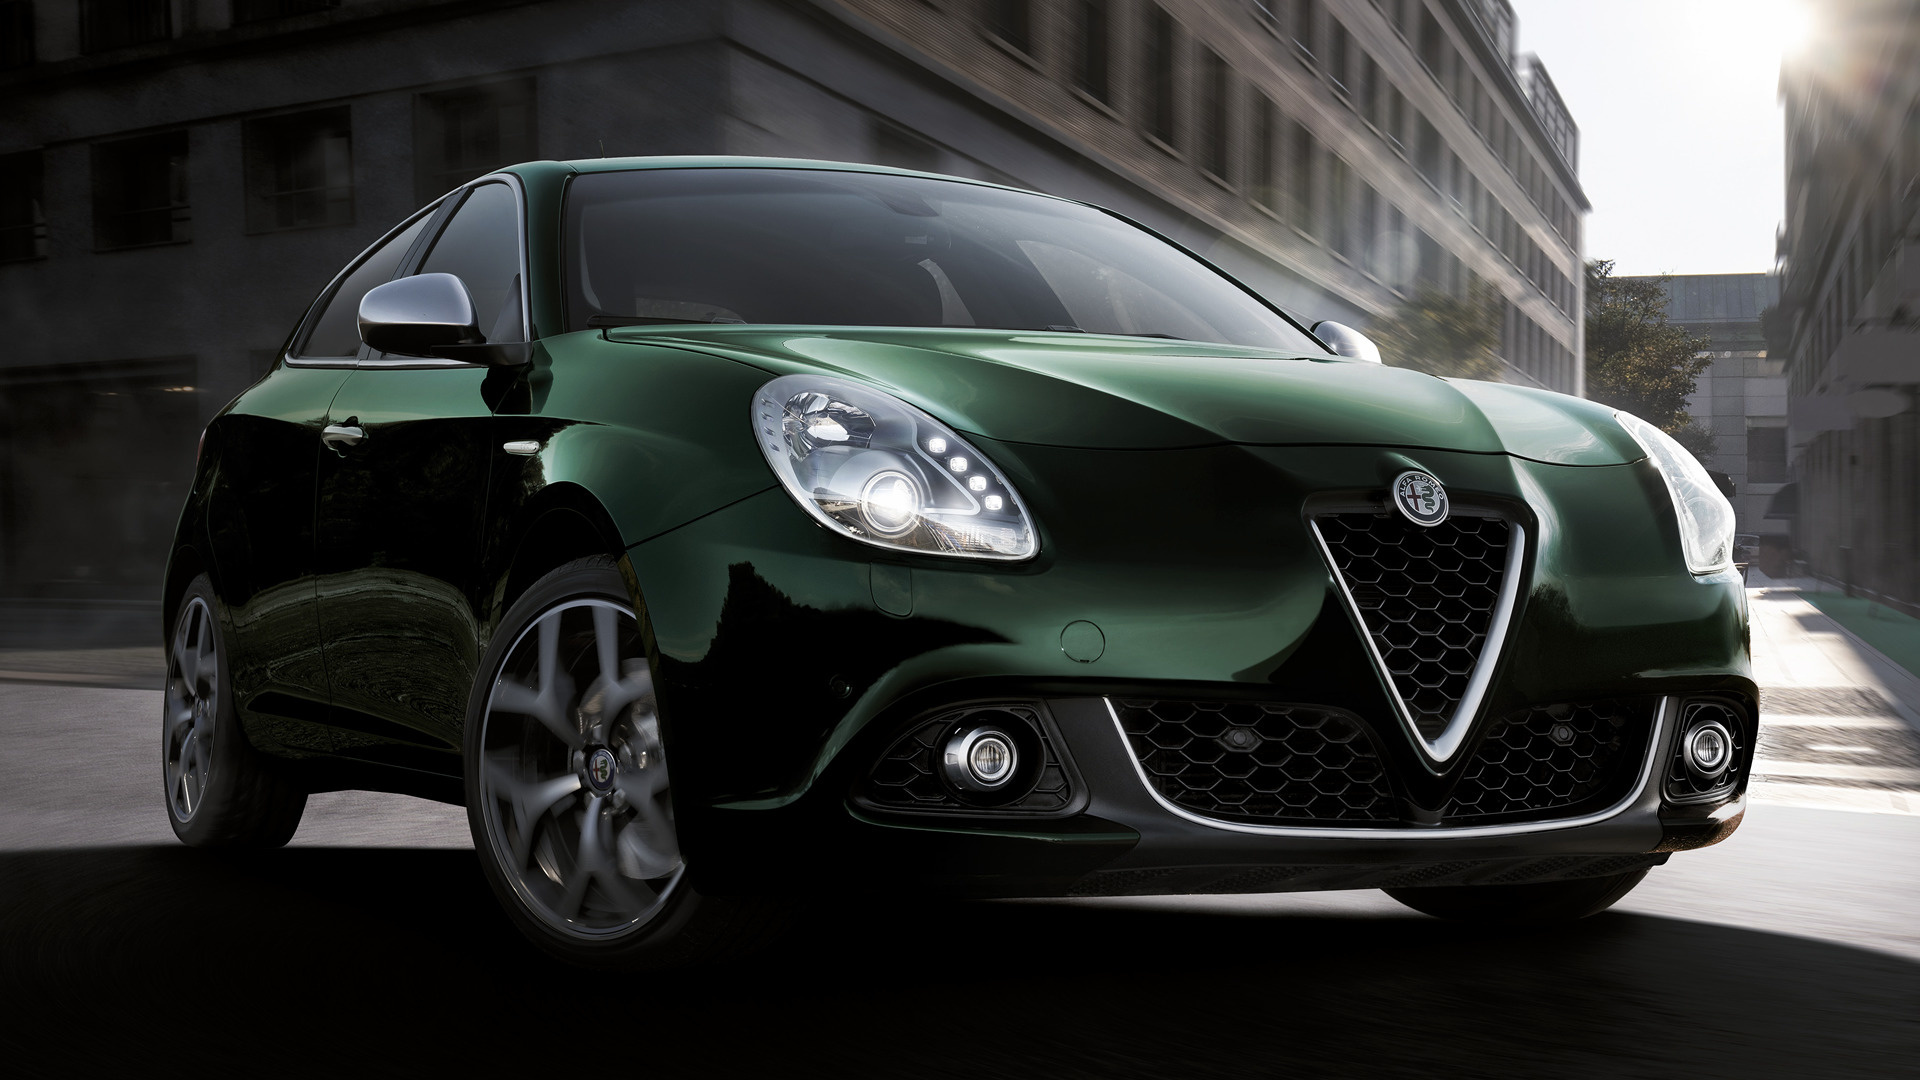 2019 Alfa Romeo Giulietta - Wallpapers and HD Images